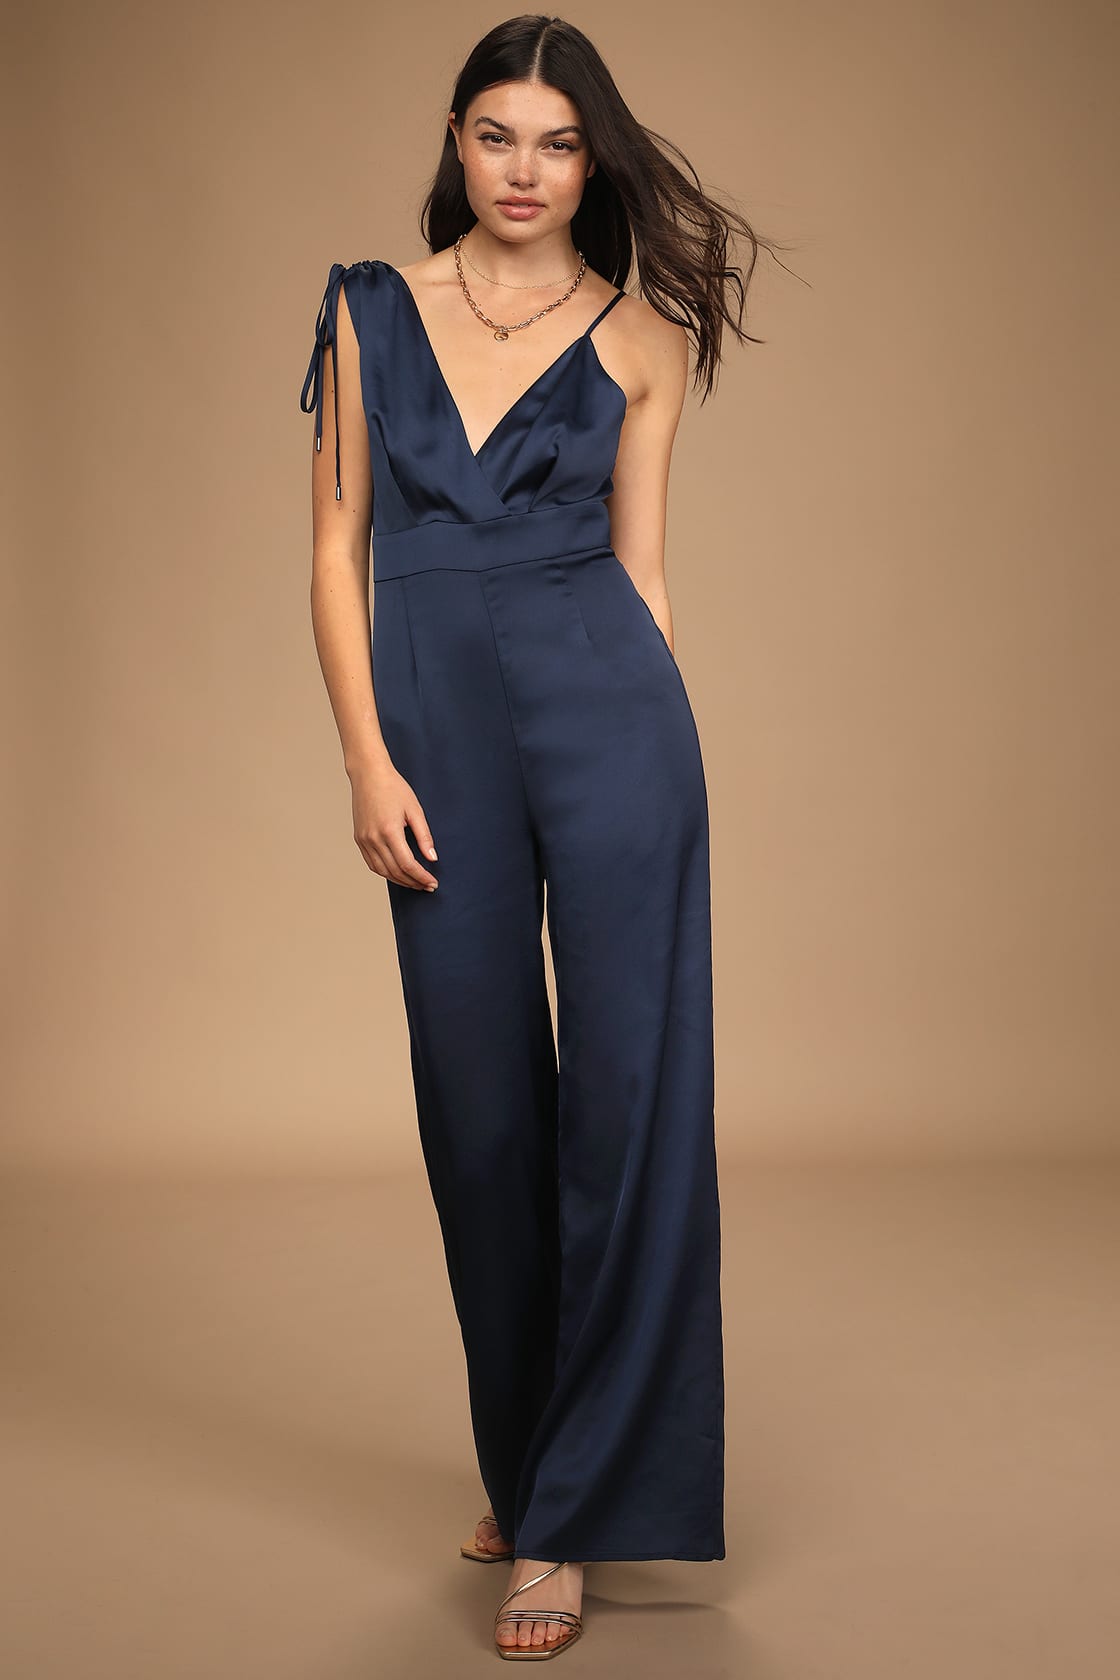 Affordable Prom Dresses: The Must-Have Trends Of 2023 - Lulus.com ...